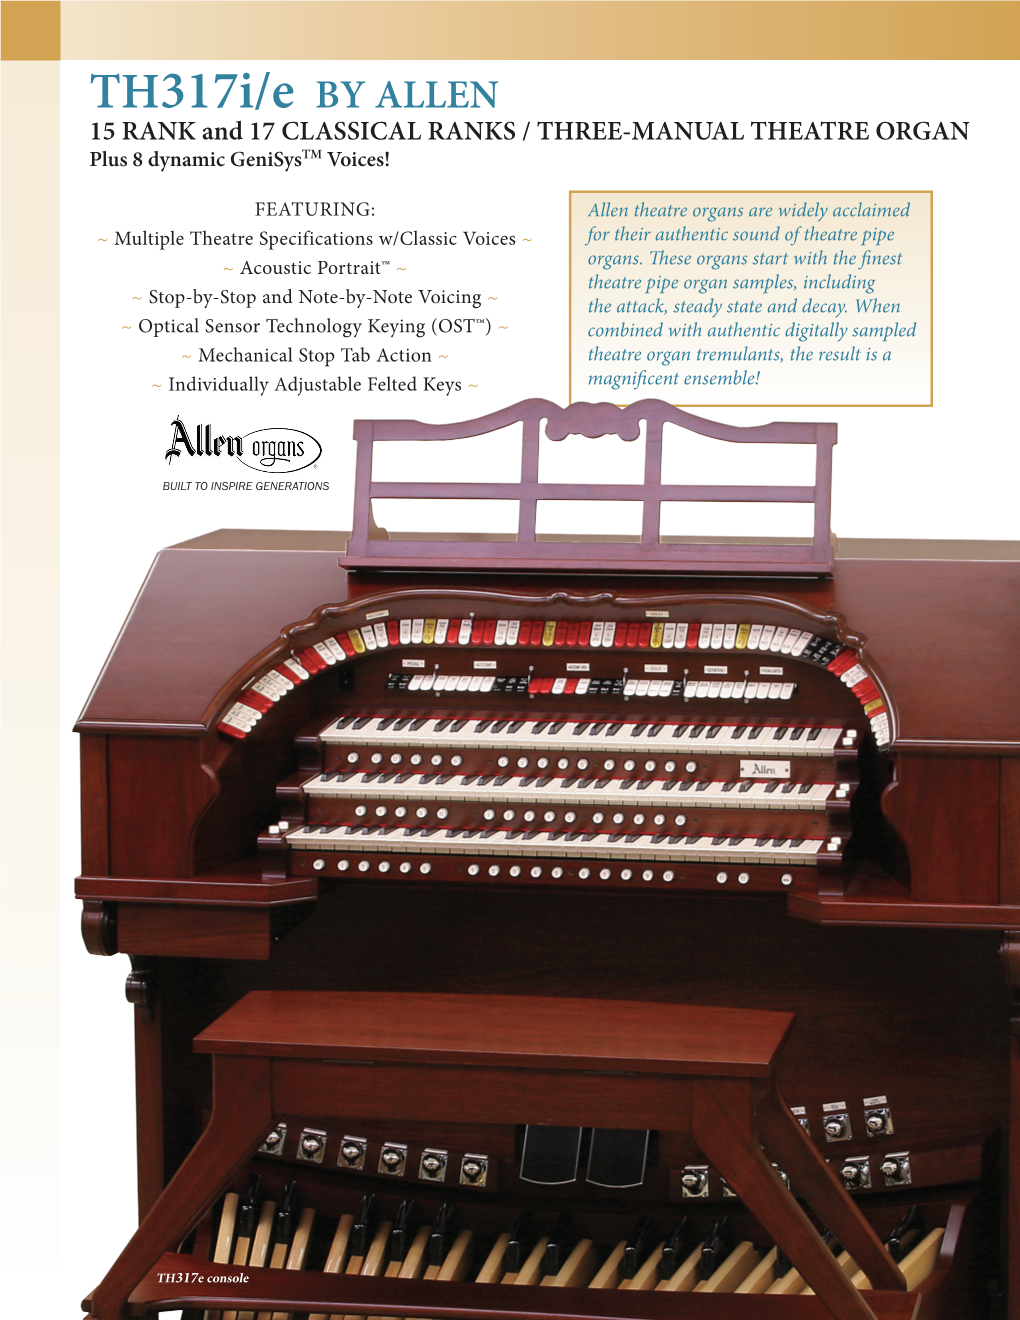 Th317i/E by ALLEN 15 RANK and 17 CLASSICAL RANKS / THREE-MANUAL THEATRE ORGAN Plus 8 Dynamic Genisystm Voices!